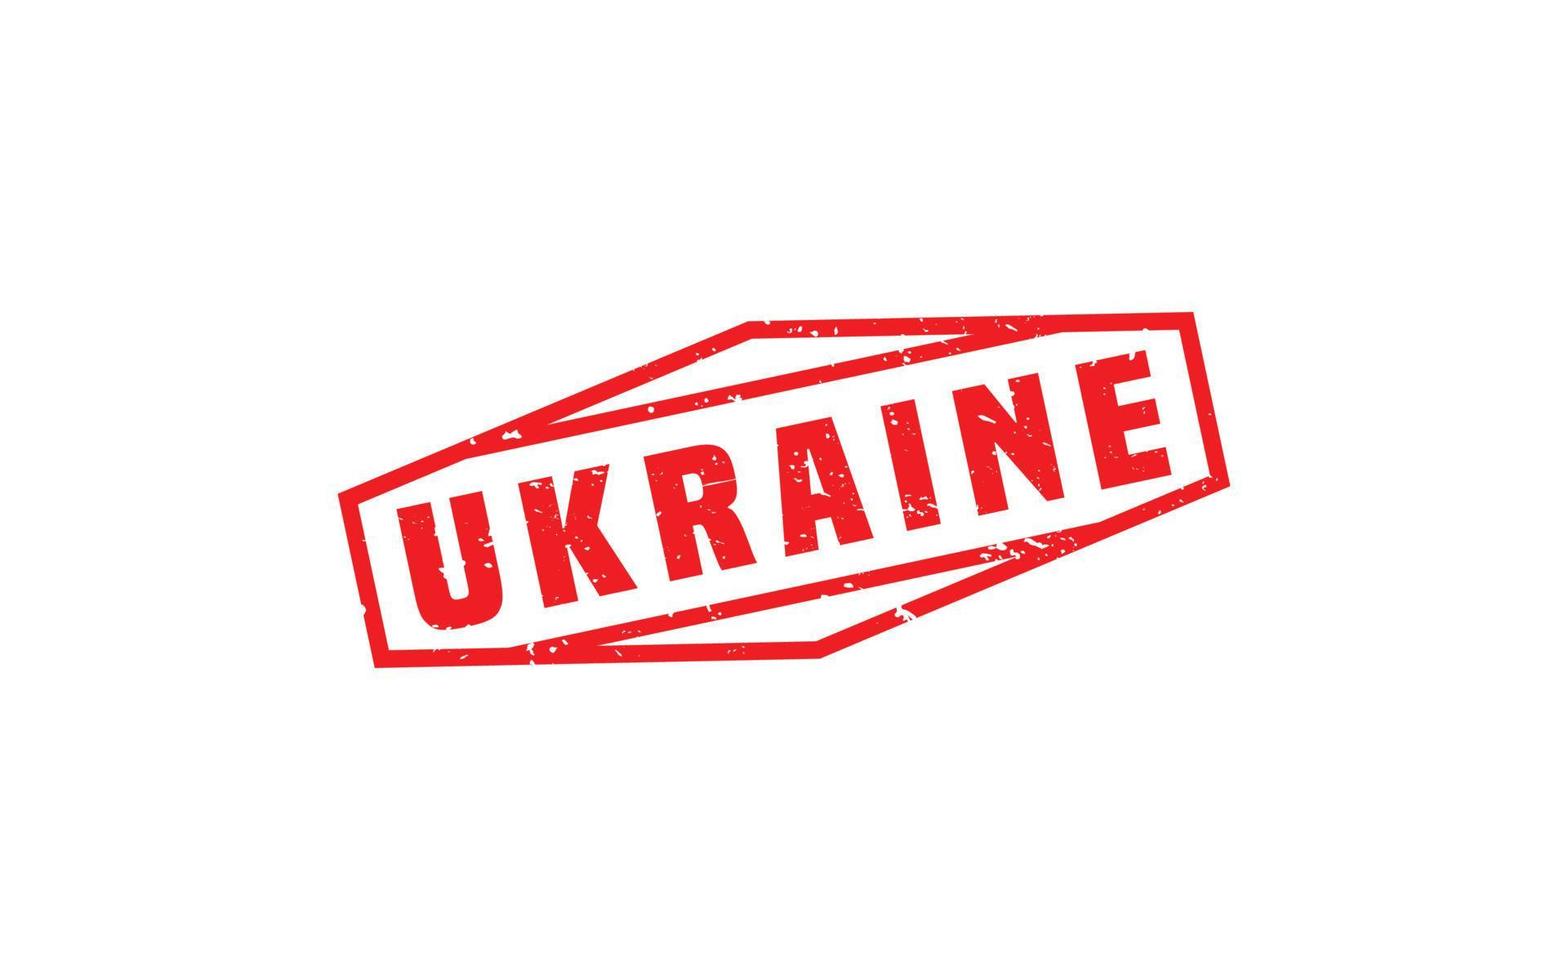 UKRAINE rubber stamp with grunge style on white background vector